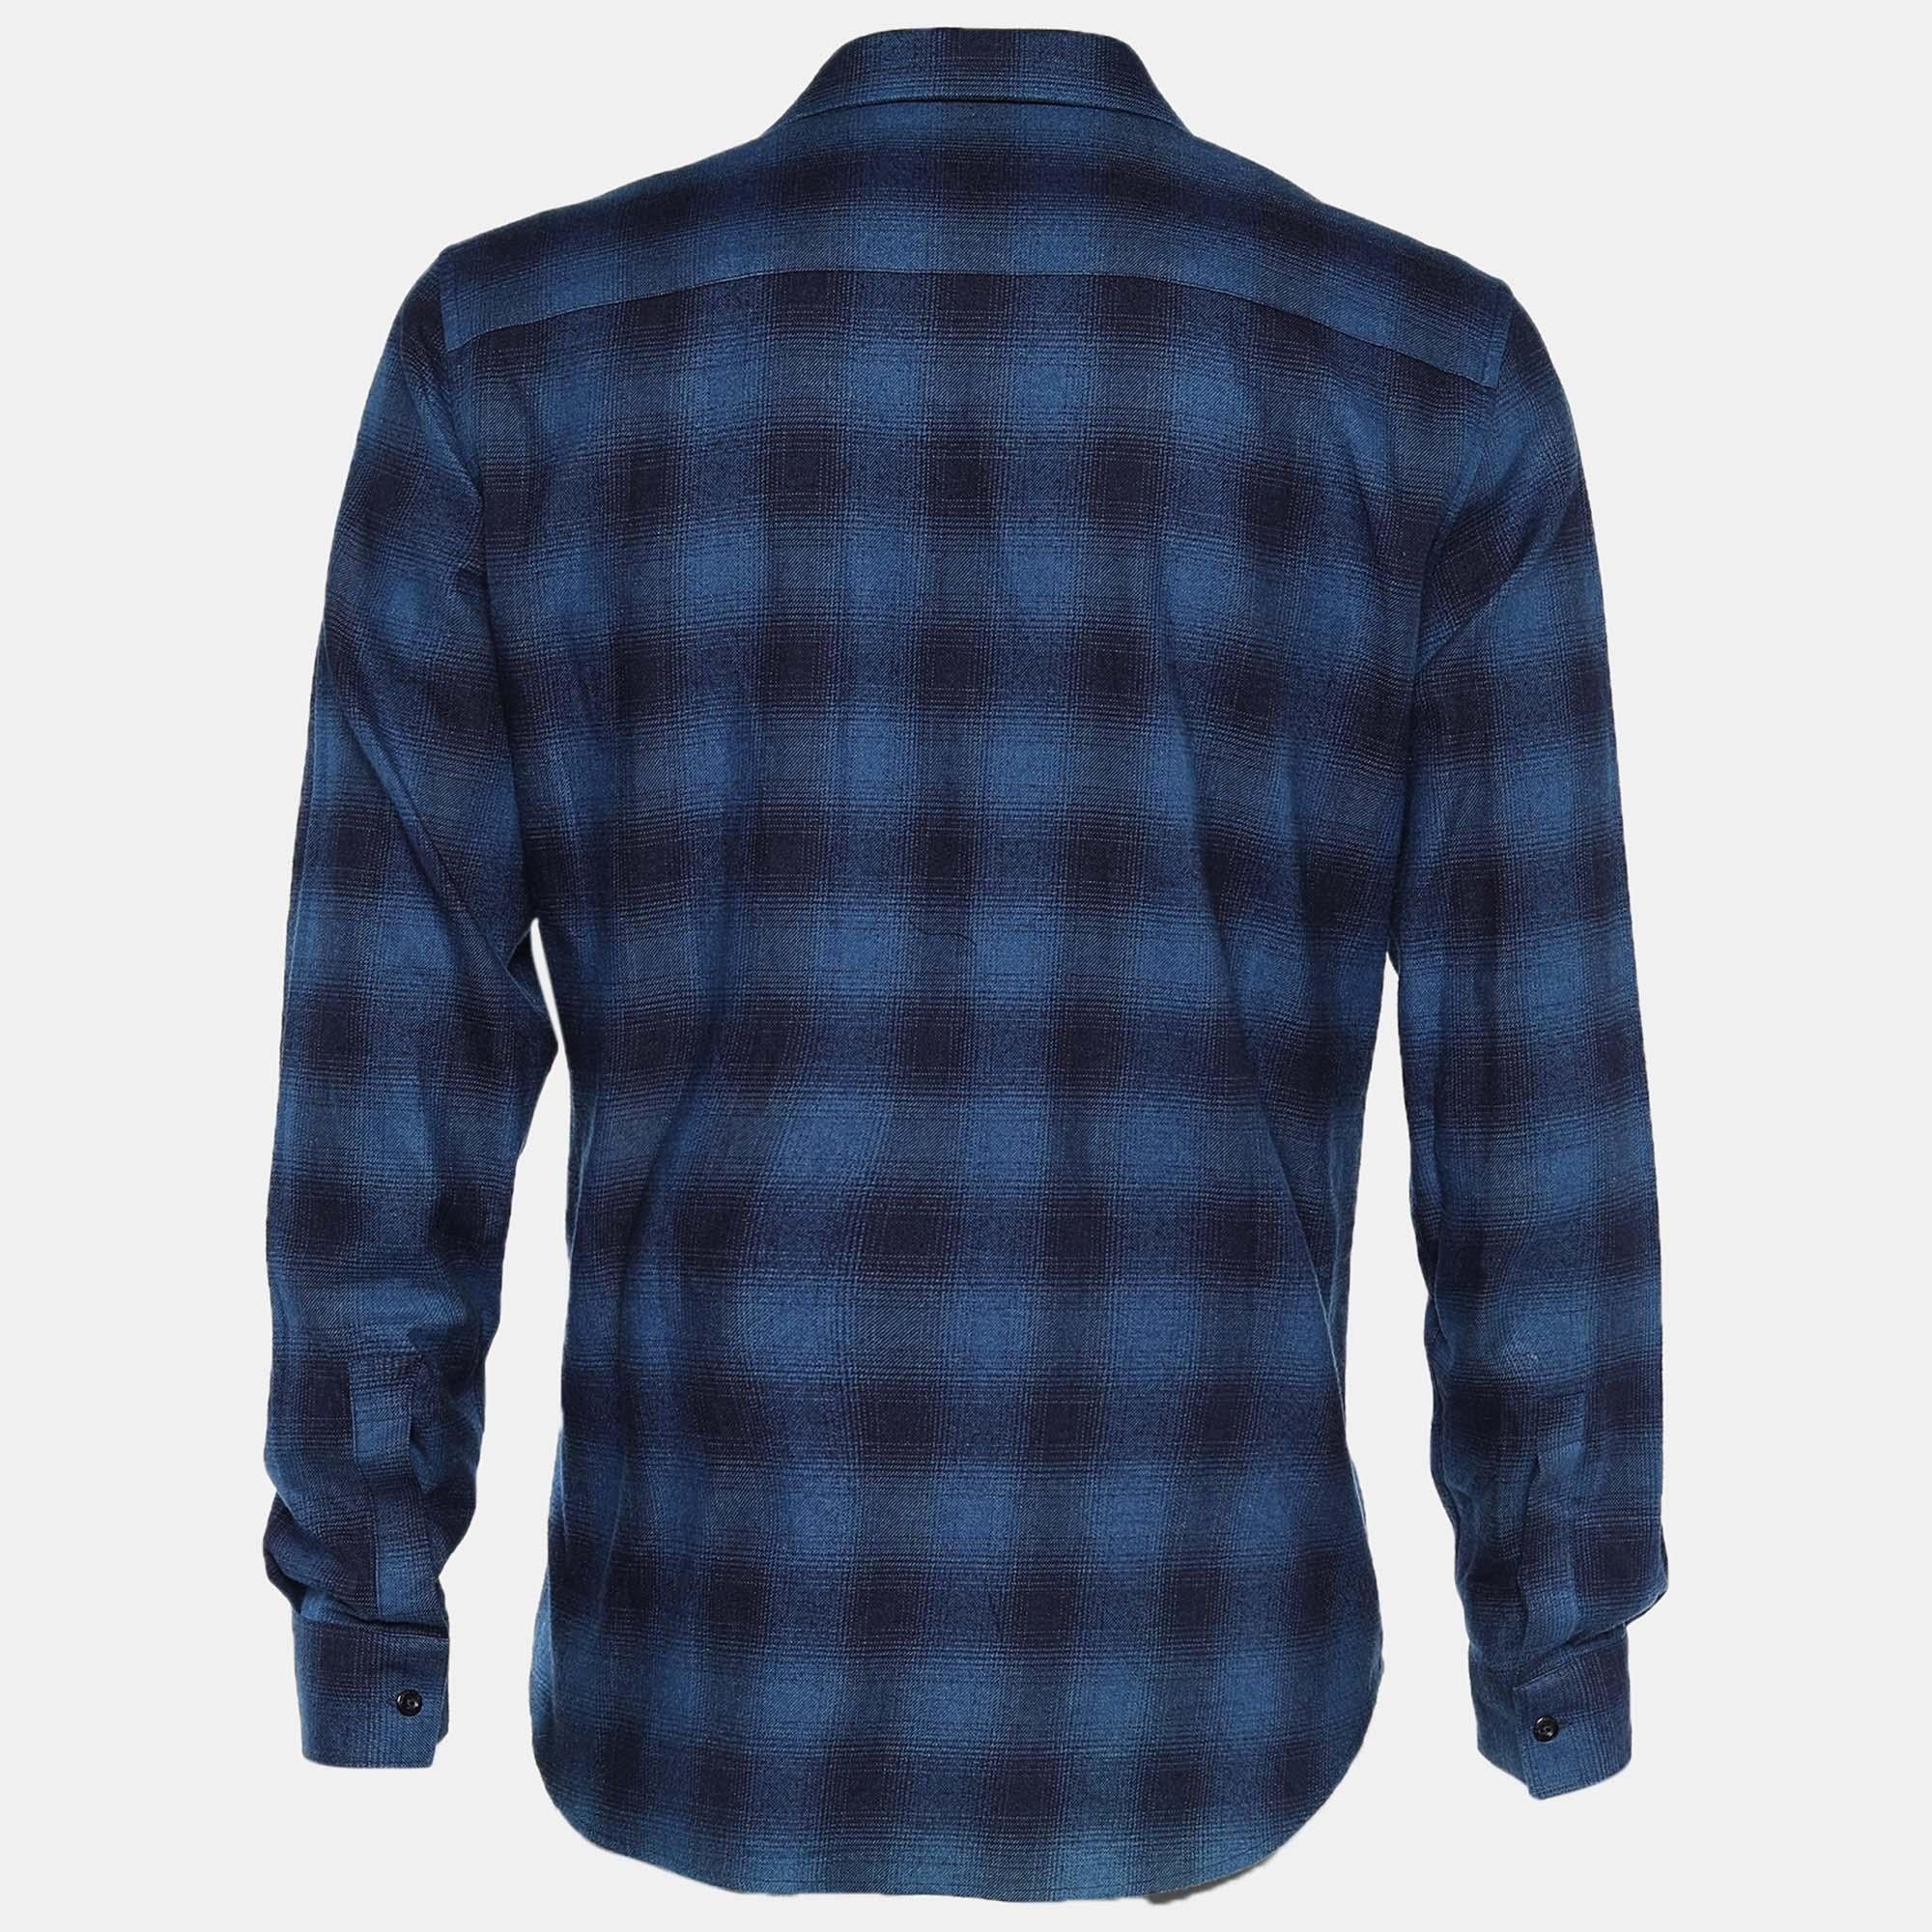 Enhance your collection with this shirt from the House of Givenchy. It is designed using navy-blue cotton fabric, which is highlighted with plaid flannel detail. It flaunts a Stars patch on the front, long sleeves, and buttoned closures. Look classy